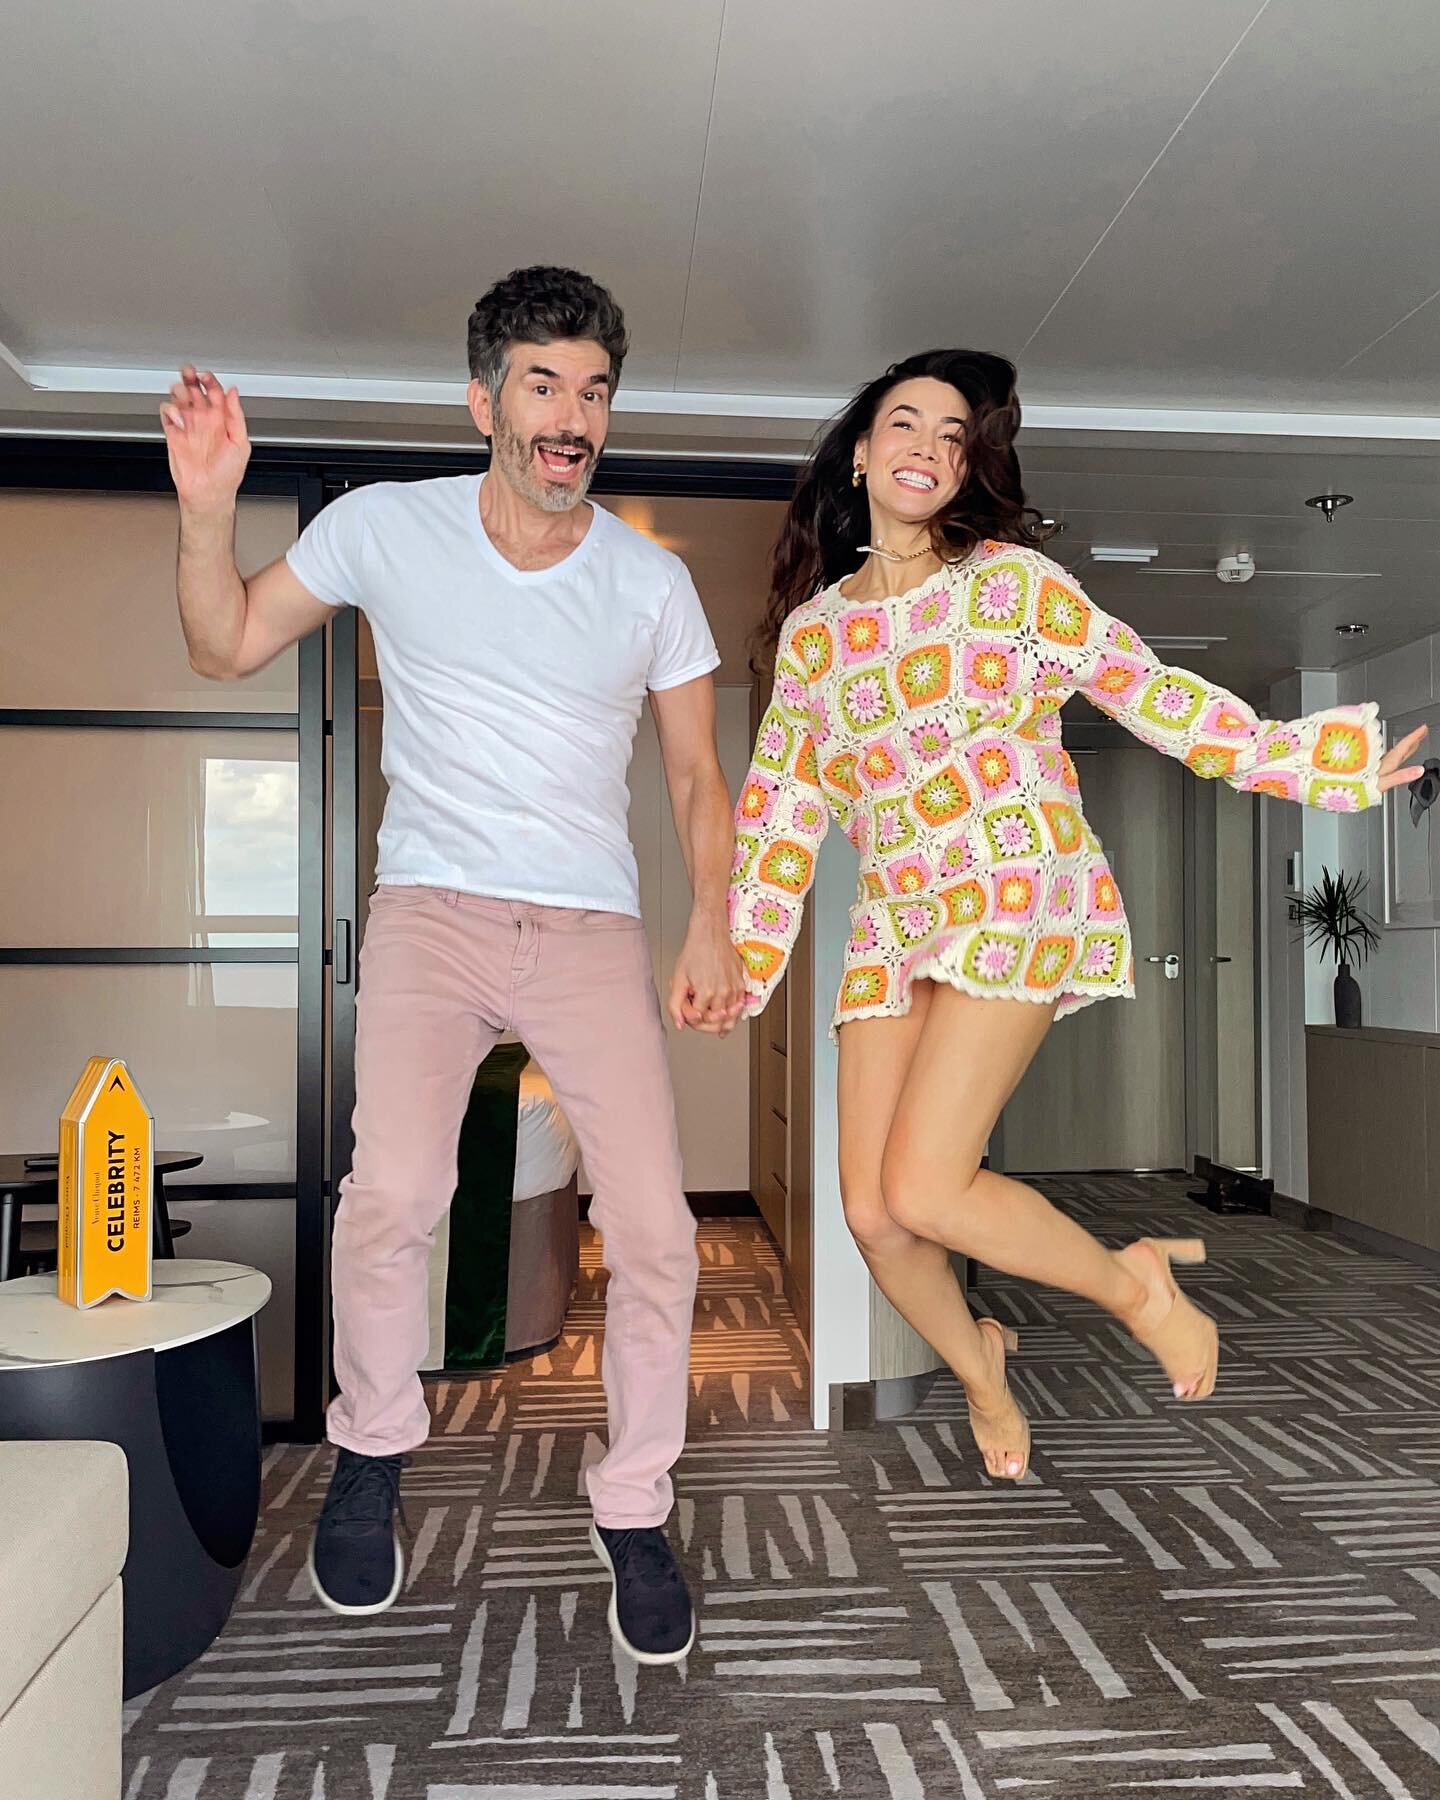 You&rsquo;ll be jumping for joy too 💃🏻🕺🏻 An honor to help launch @celebritycruises&rsquo; brand new #celebrityascent and we made some new friends along the way 🥰
PS&mdash;I&rsquo;ve linked my cruise looks in my Stories! #babyletscruise #celebrit